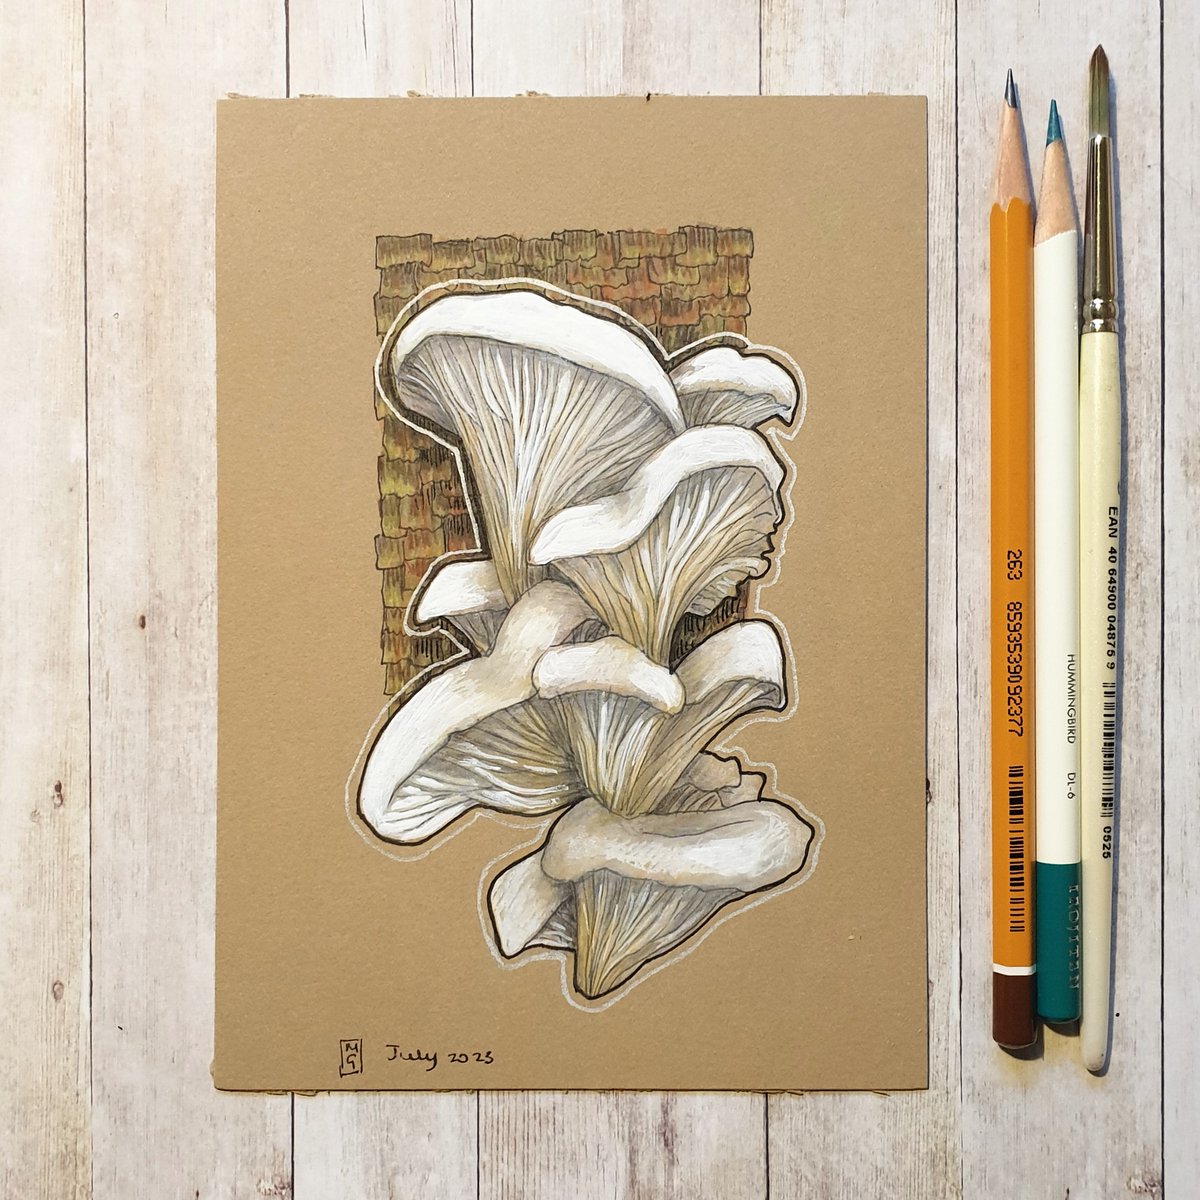 Another piece of art that would enhance your kitchen or dining room décor.  White oyster mushrooms.  This is my original drawing and it is available here...
theweeowlart.etsy.com/listing/169415…
#Mushrooms #MushroomDrawing #Fungi #MushroomArt #OriginalArt #drawing #PenAndInk #ColourPencil